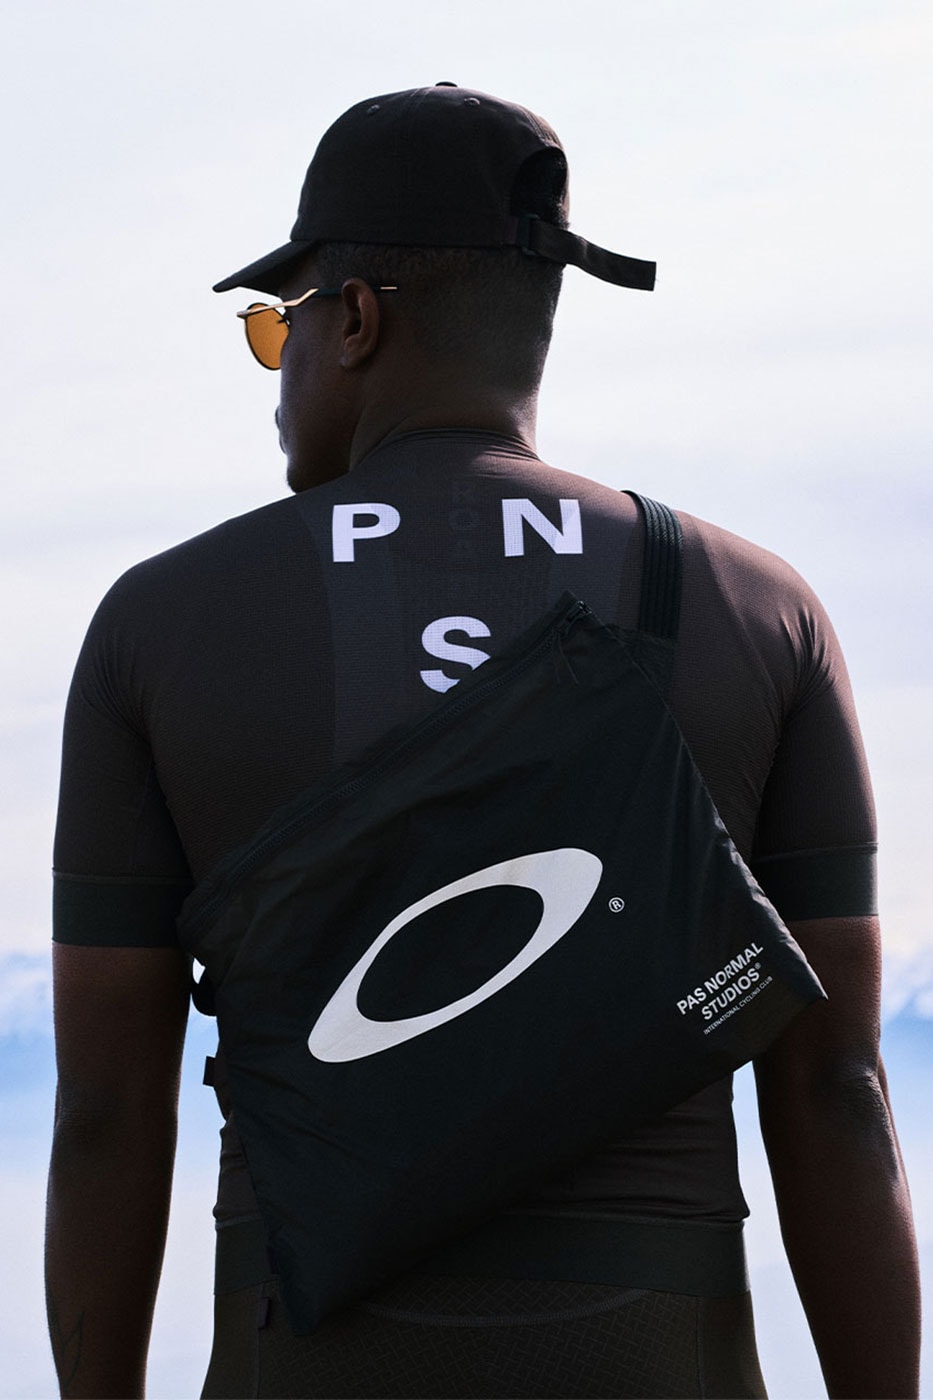 Pas Normal Studios Oakley Cycling Collection "Black Olive" "Off White" Release Info 